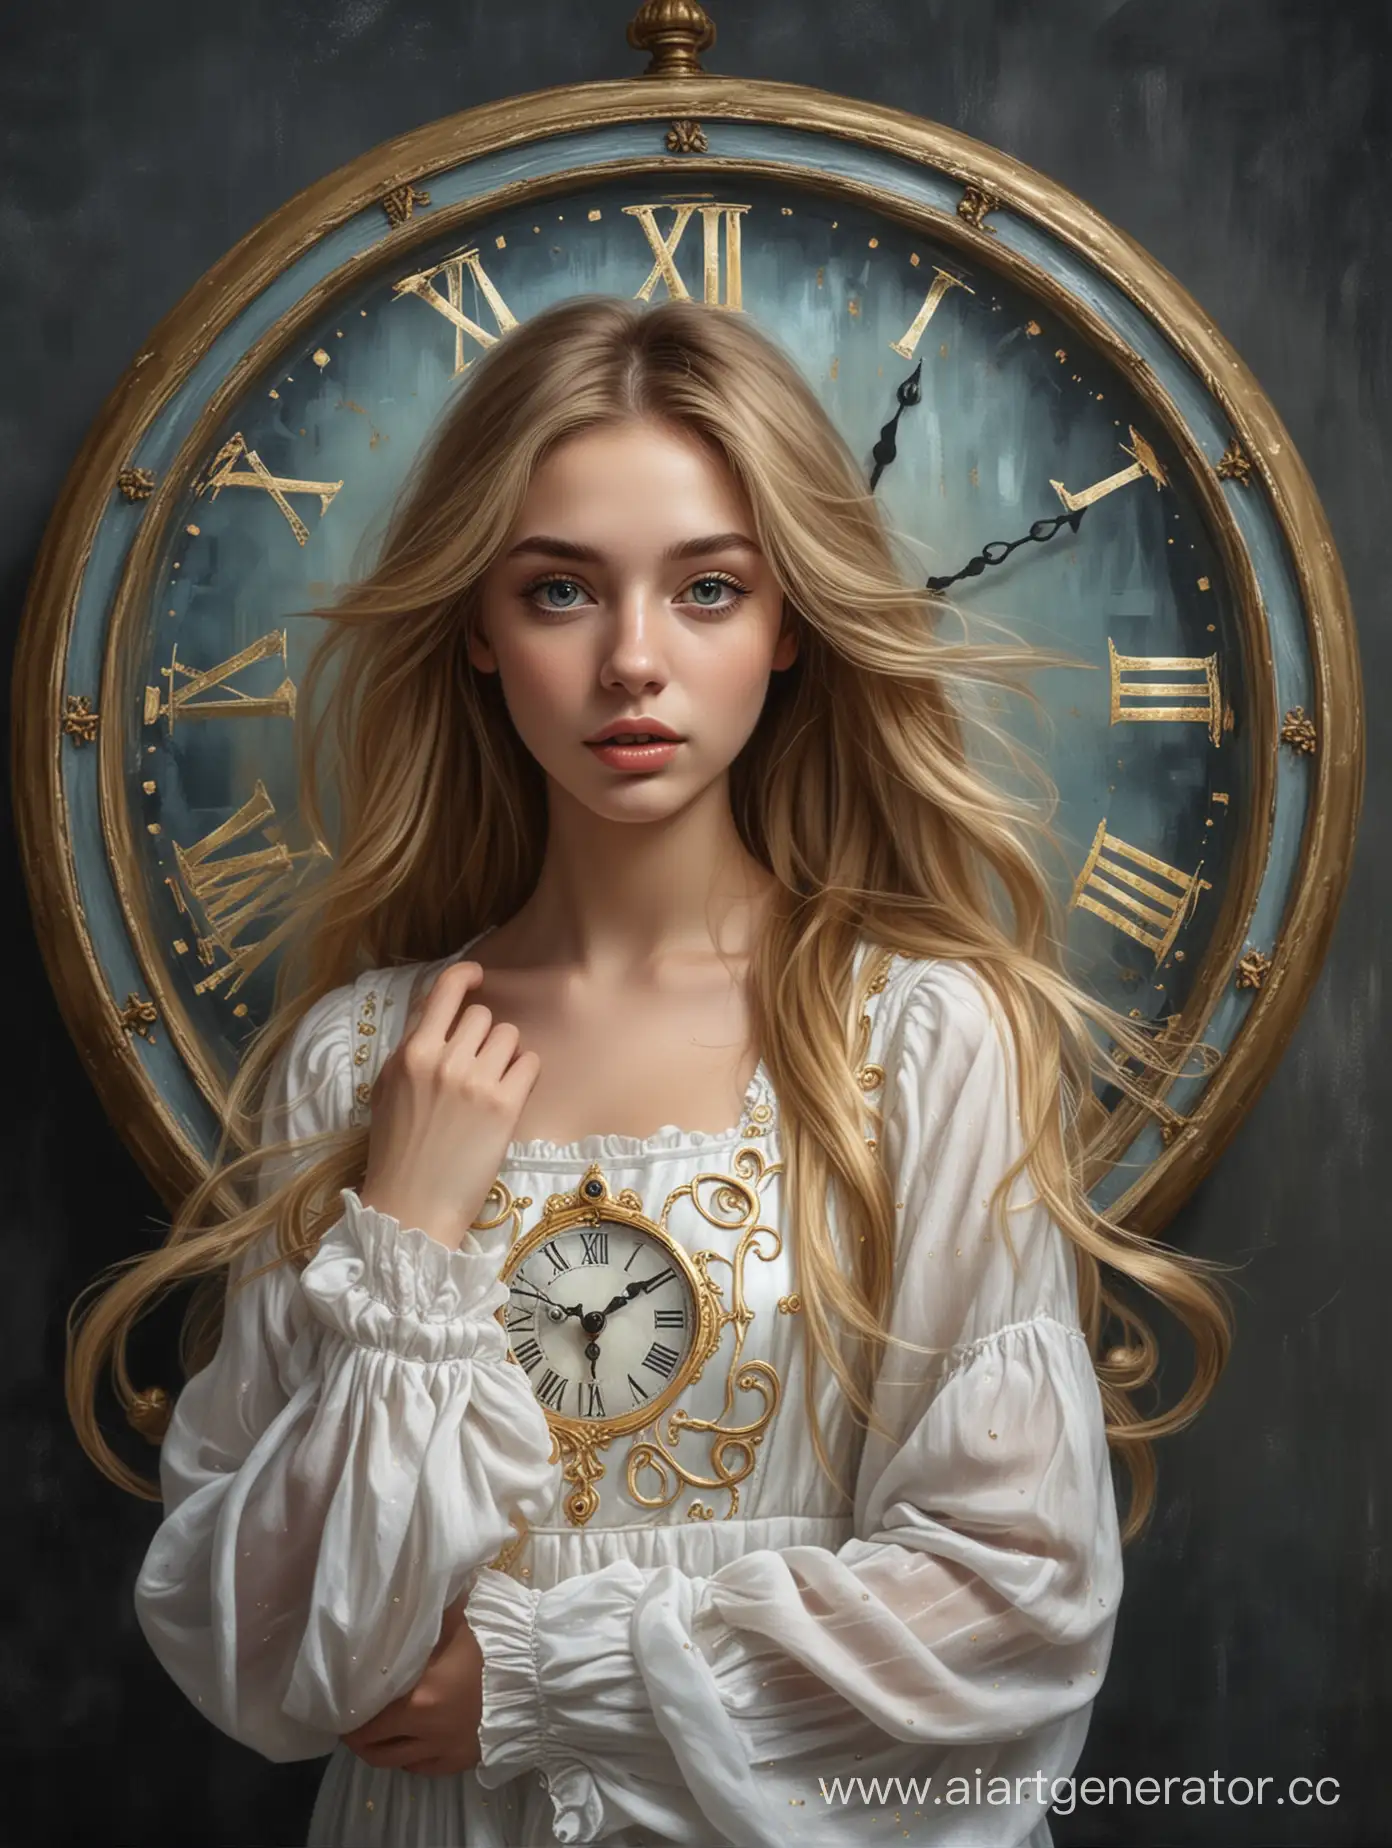 Enchanting-Girl-with-Flowing-Hair-Amidst-Golden-Clocks